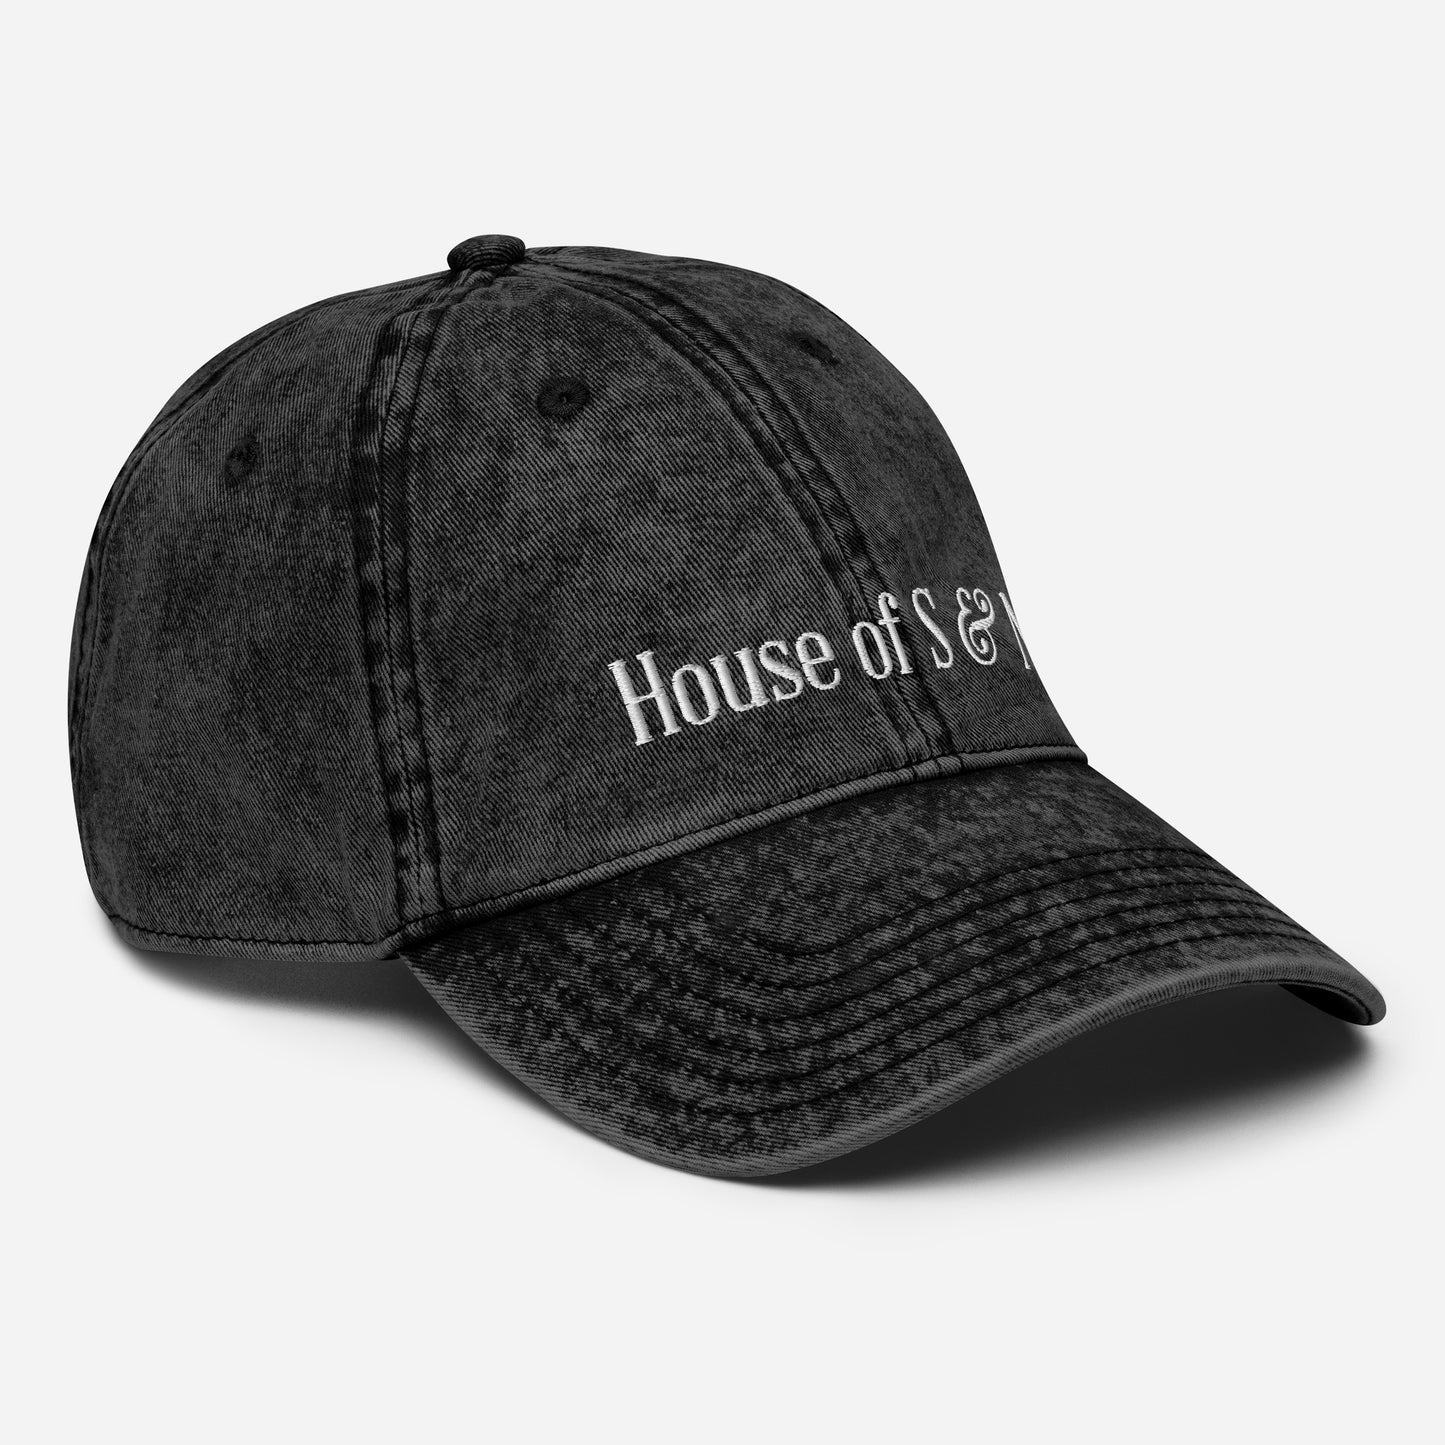 Vintage Cotton Twill Cap - House of S & N